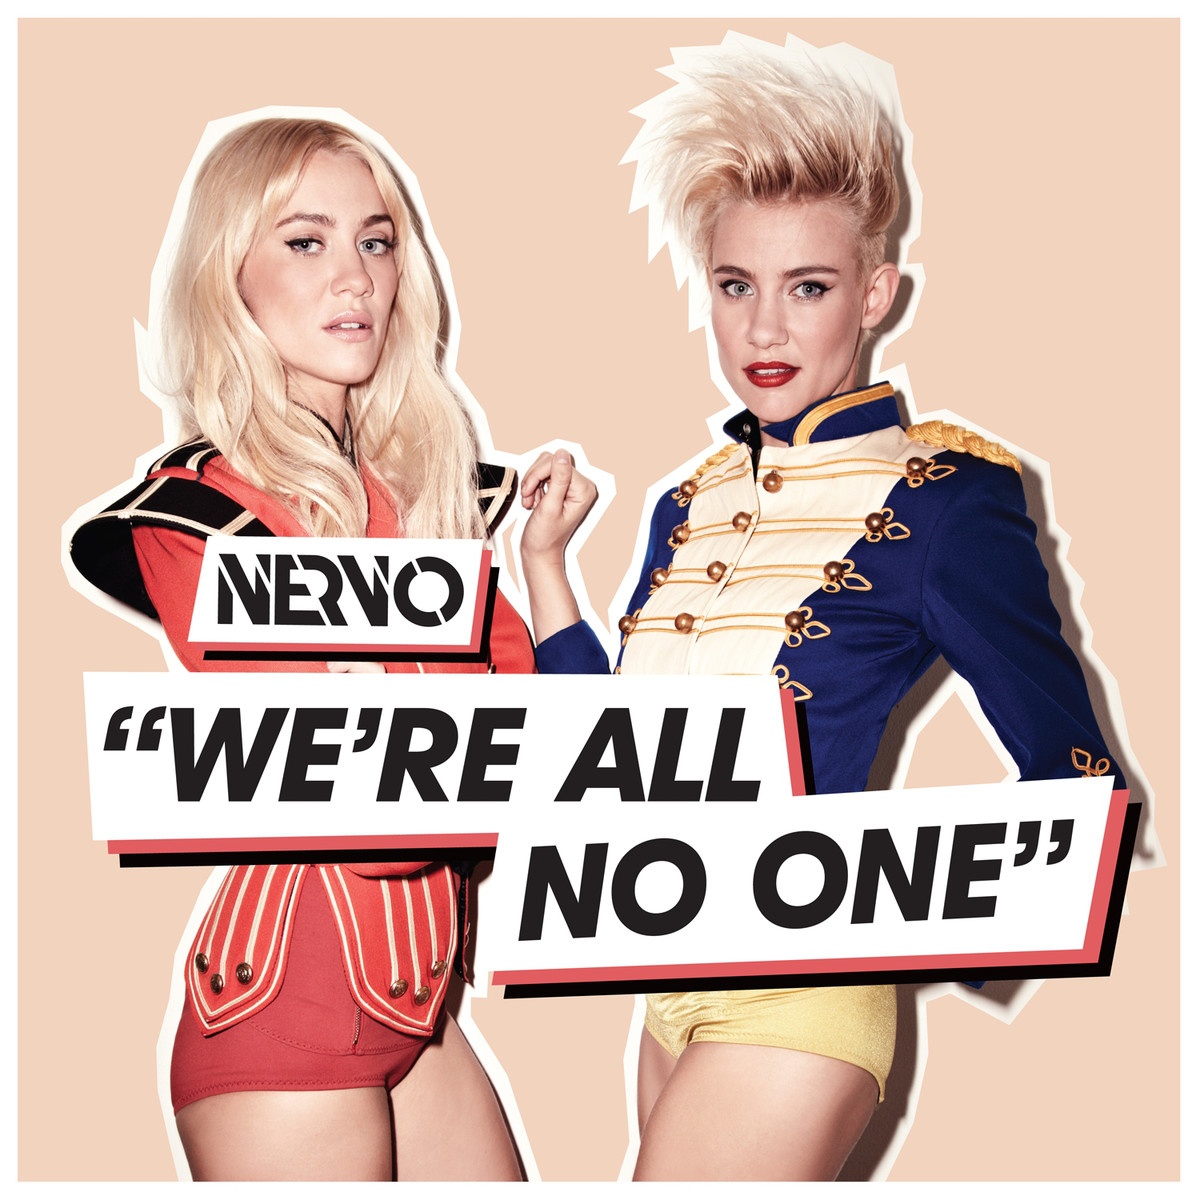 We're All No One (Hook N Sling Remix) Feat. Afrojack & Steve Aoki